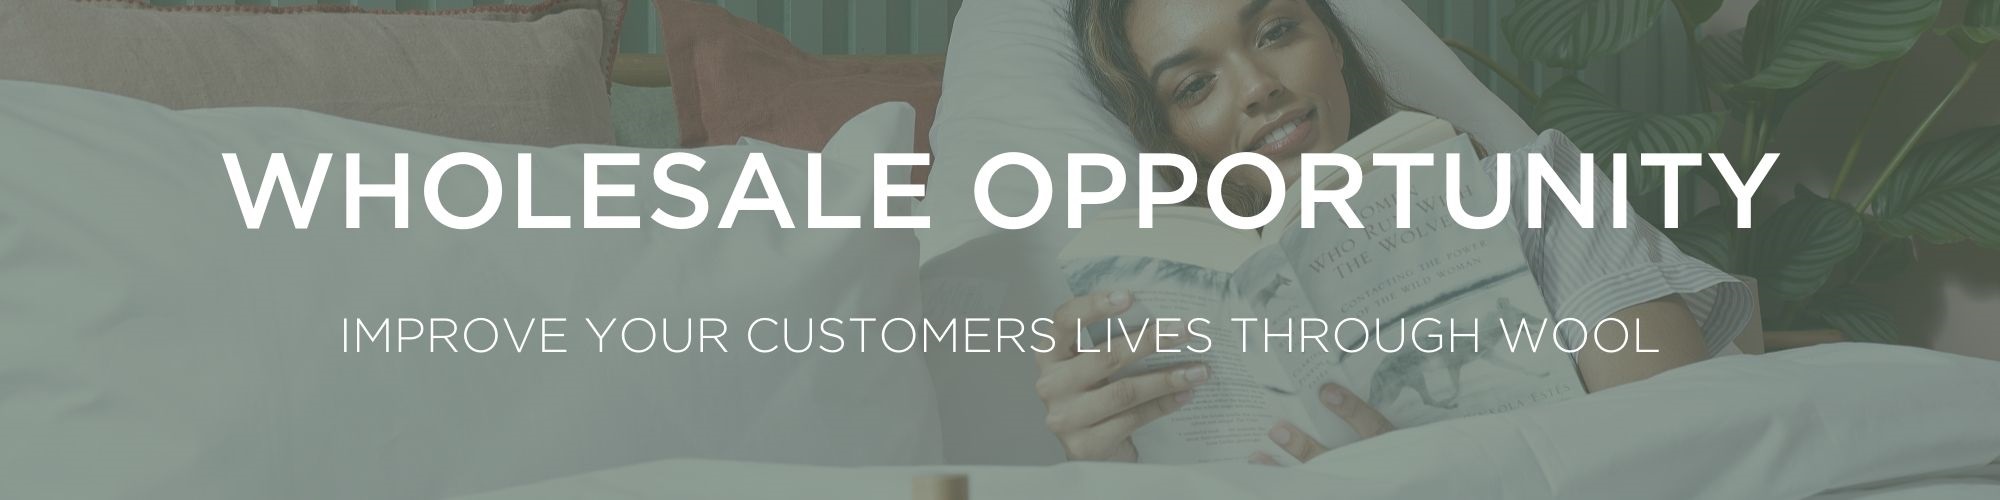 wholesale opportunity banner